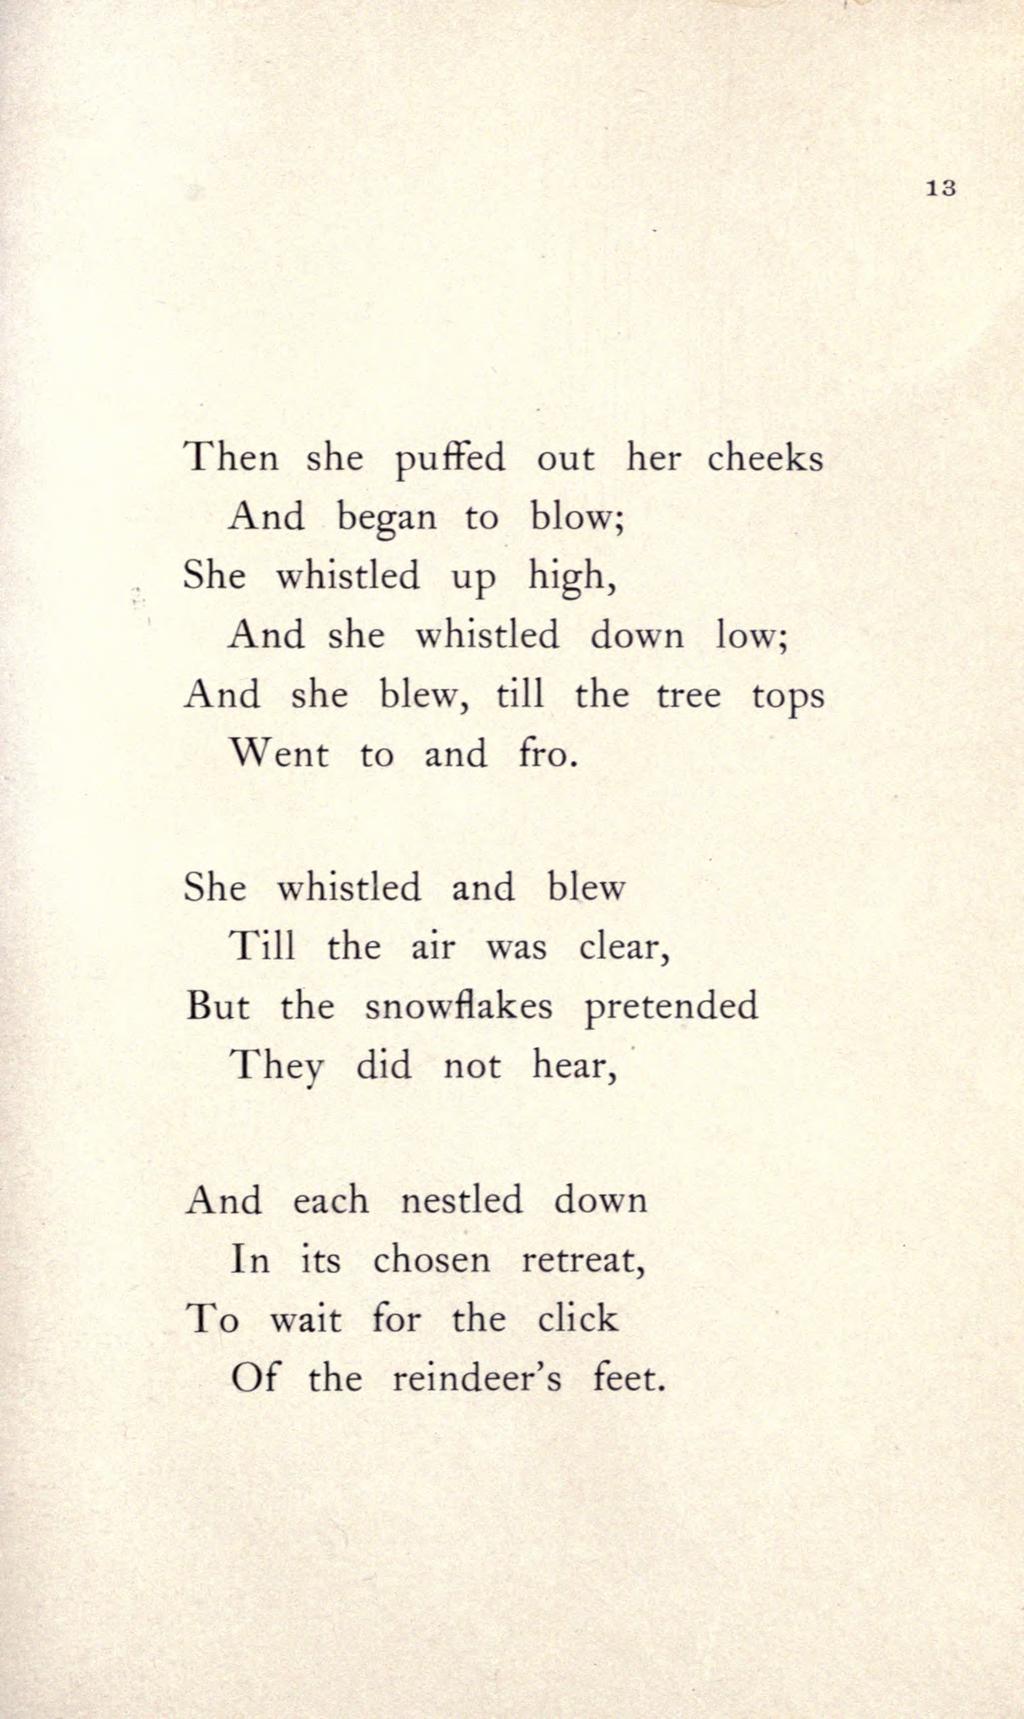 Then she puffed out her cheeks And began to blow; She whistled up high, And she whistled down low; And she blew, till the tree tops Went to and fro.